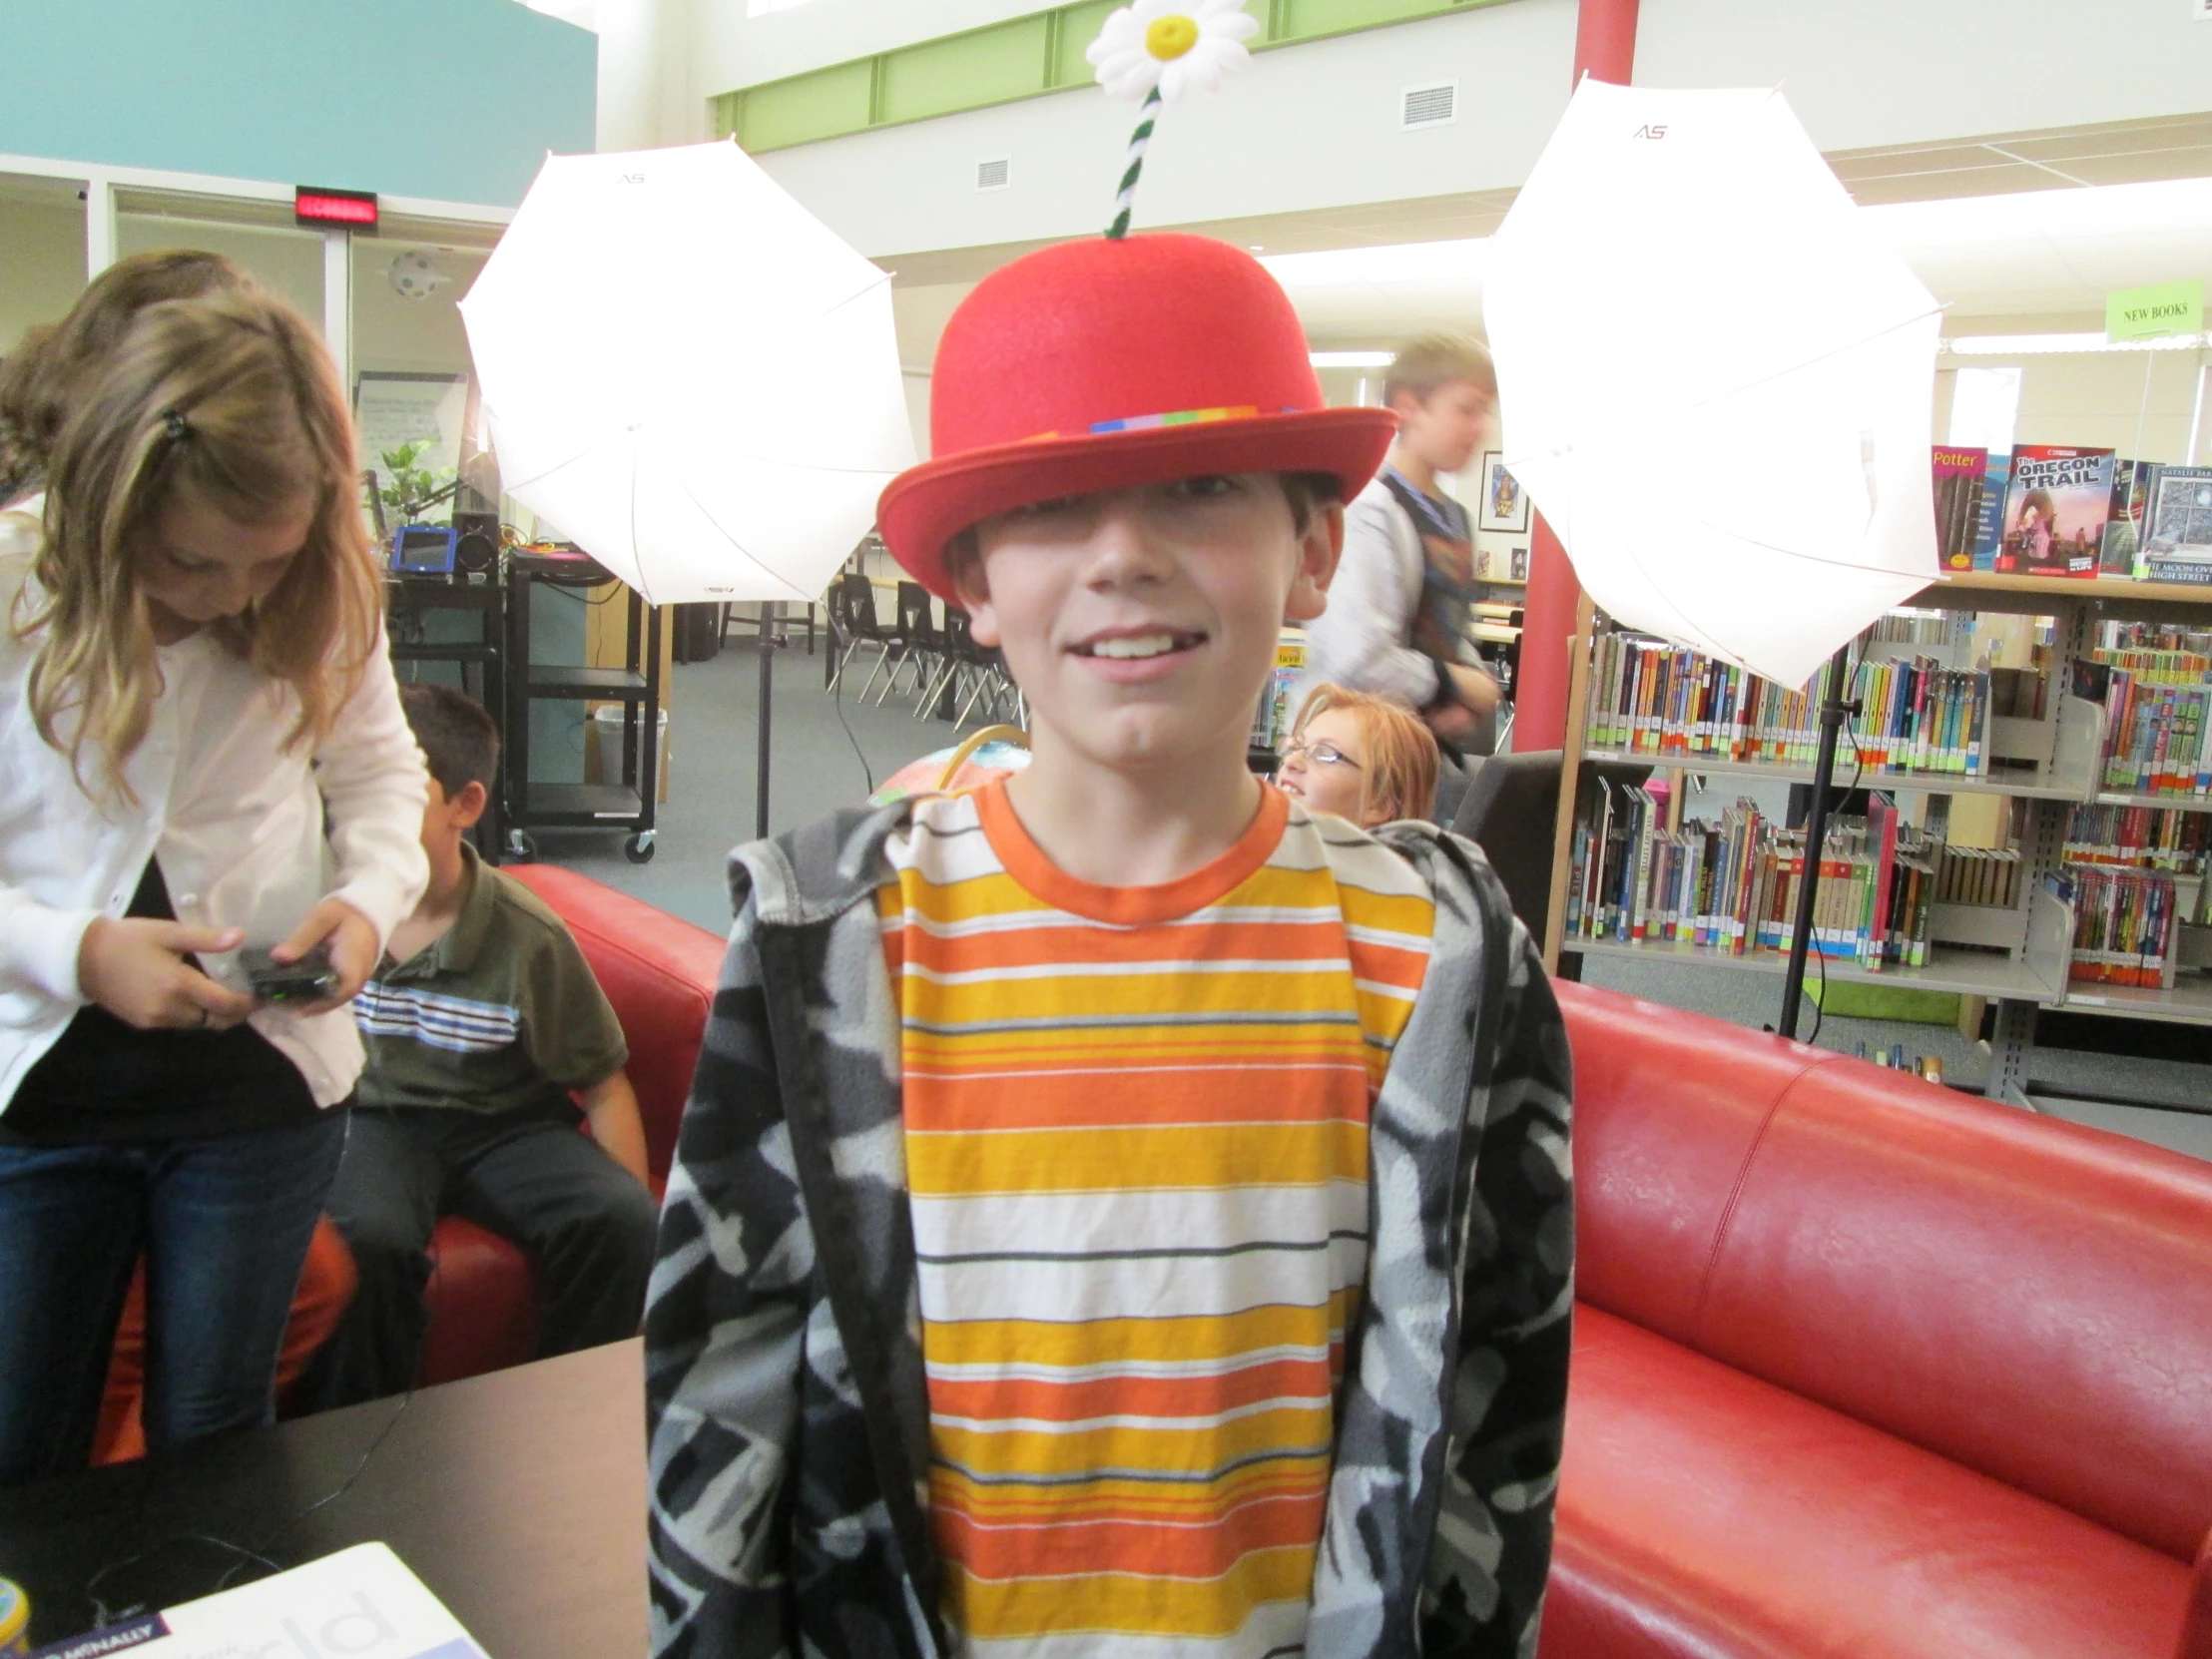 a boy wearing a red hat with an umbrella on it